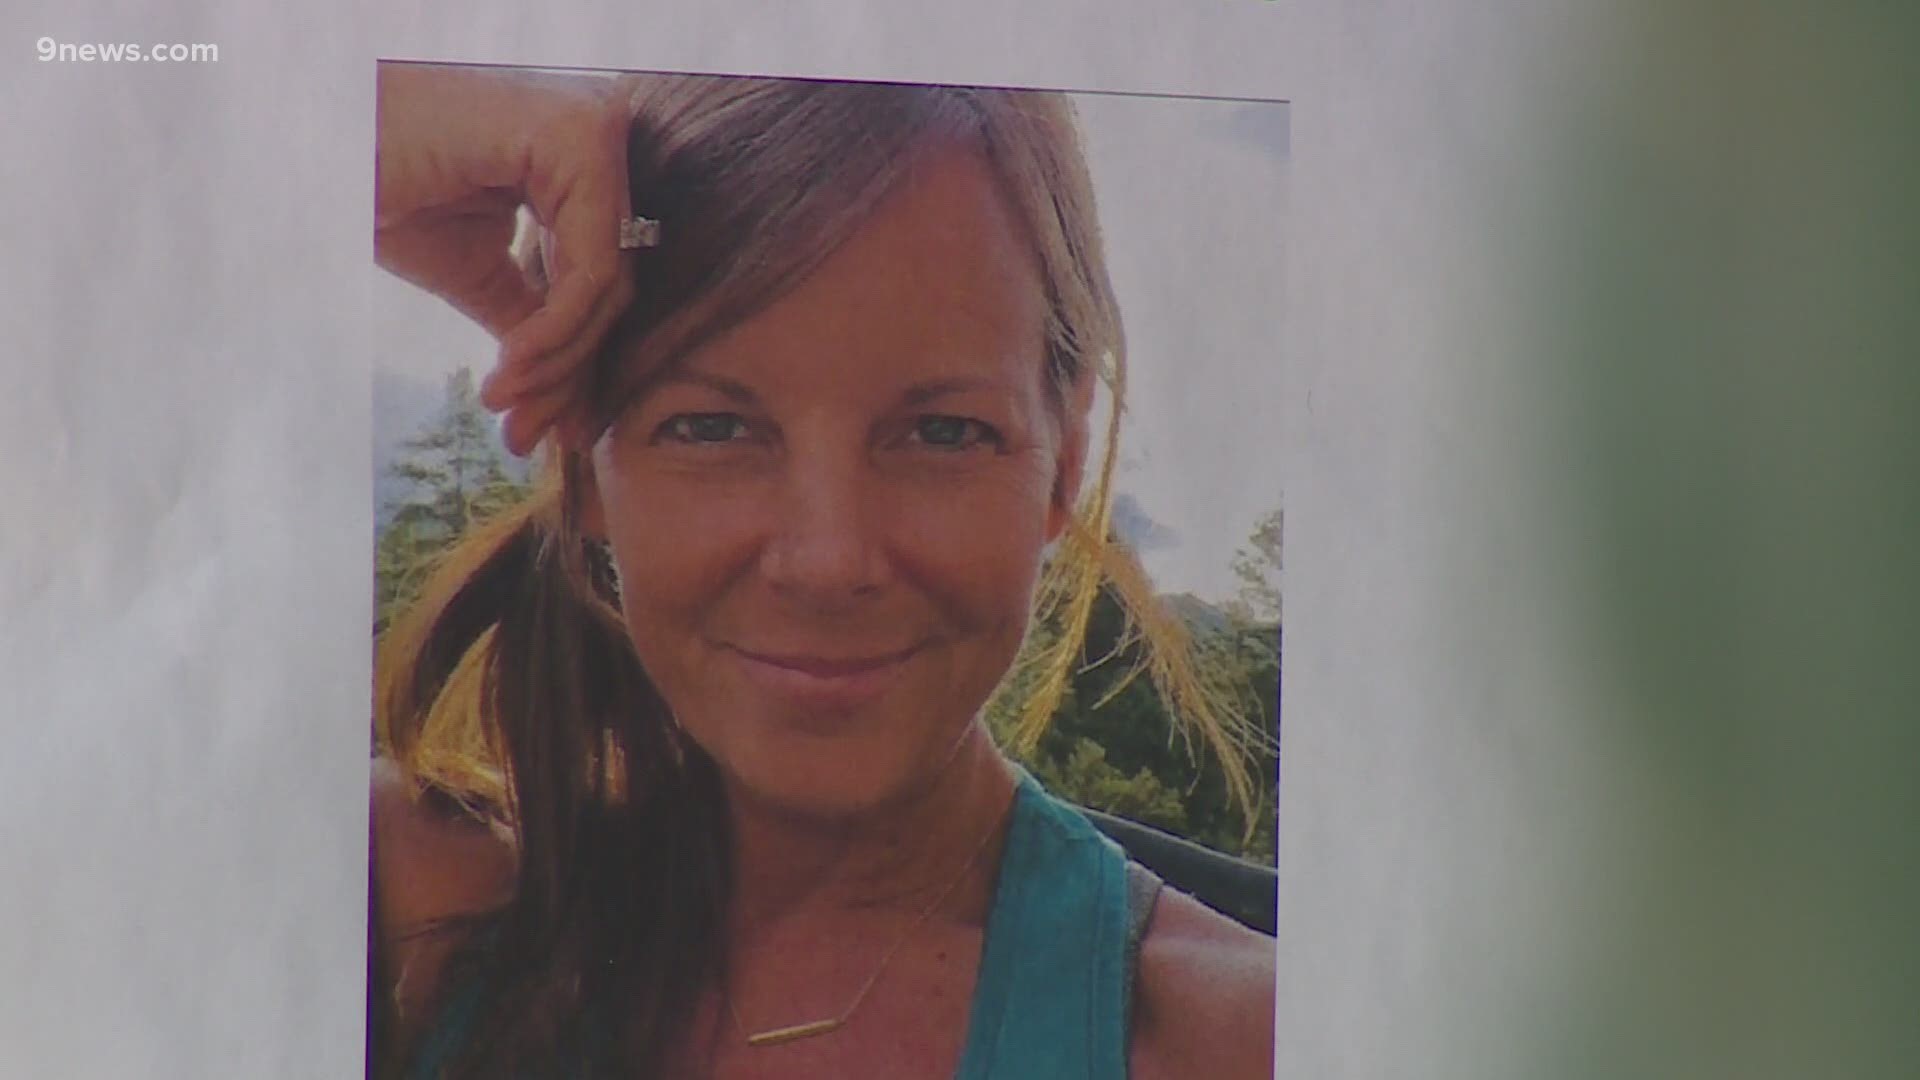 Suzanne Morphew was last seen riding her bike about two weeks ago. The FBI, CBI and Chaffee County authorities have been focusing on a specific location near Salida.